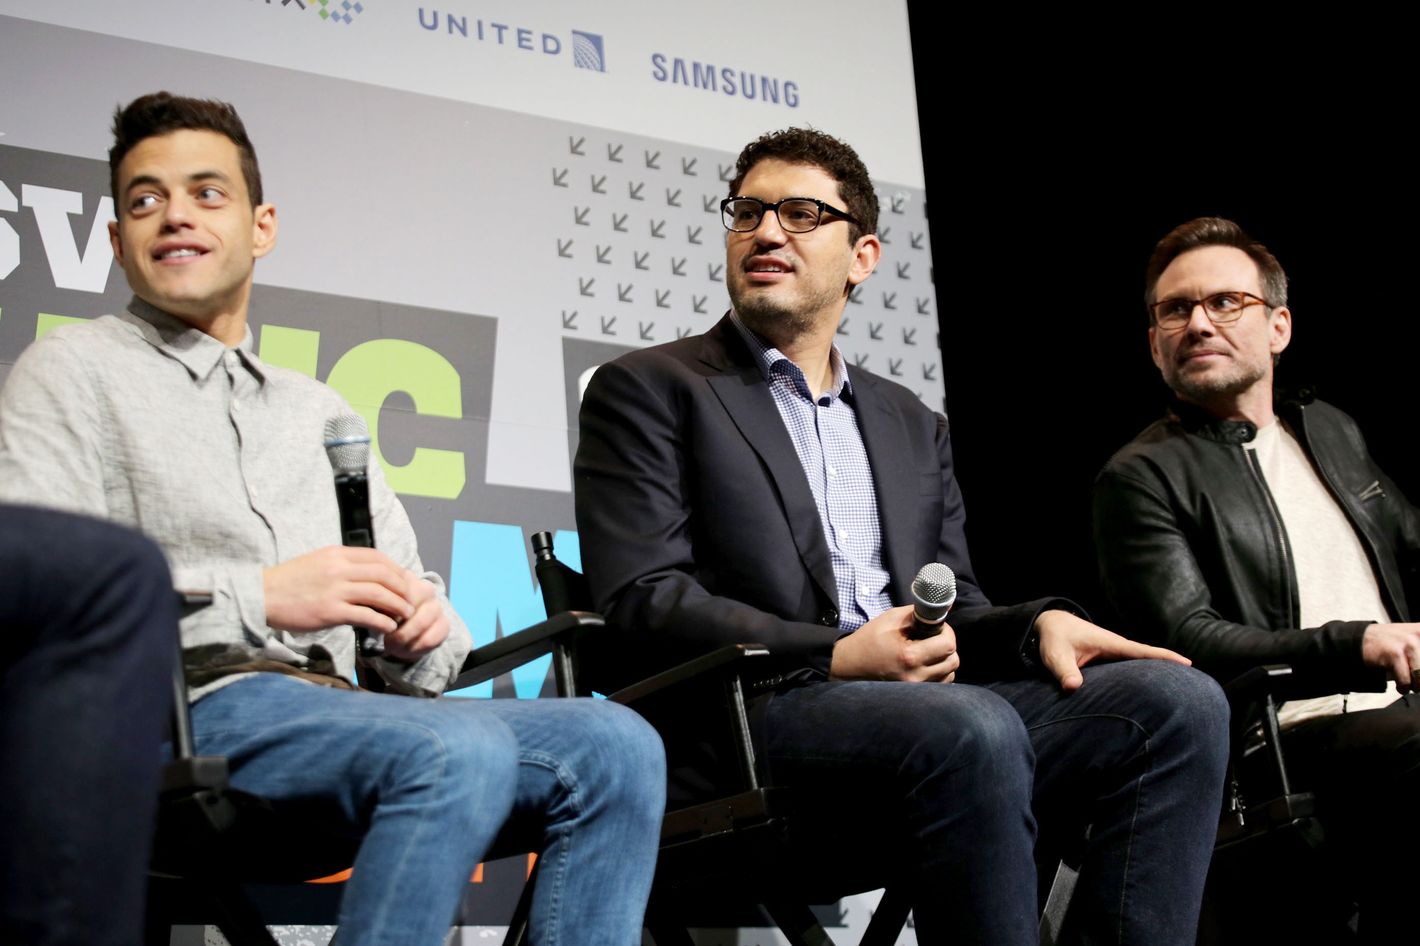 Interview with Mr Robot cast at SXSW 2015